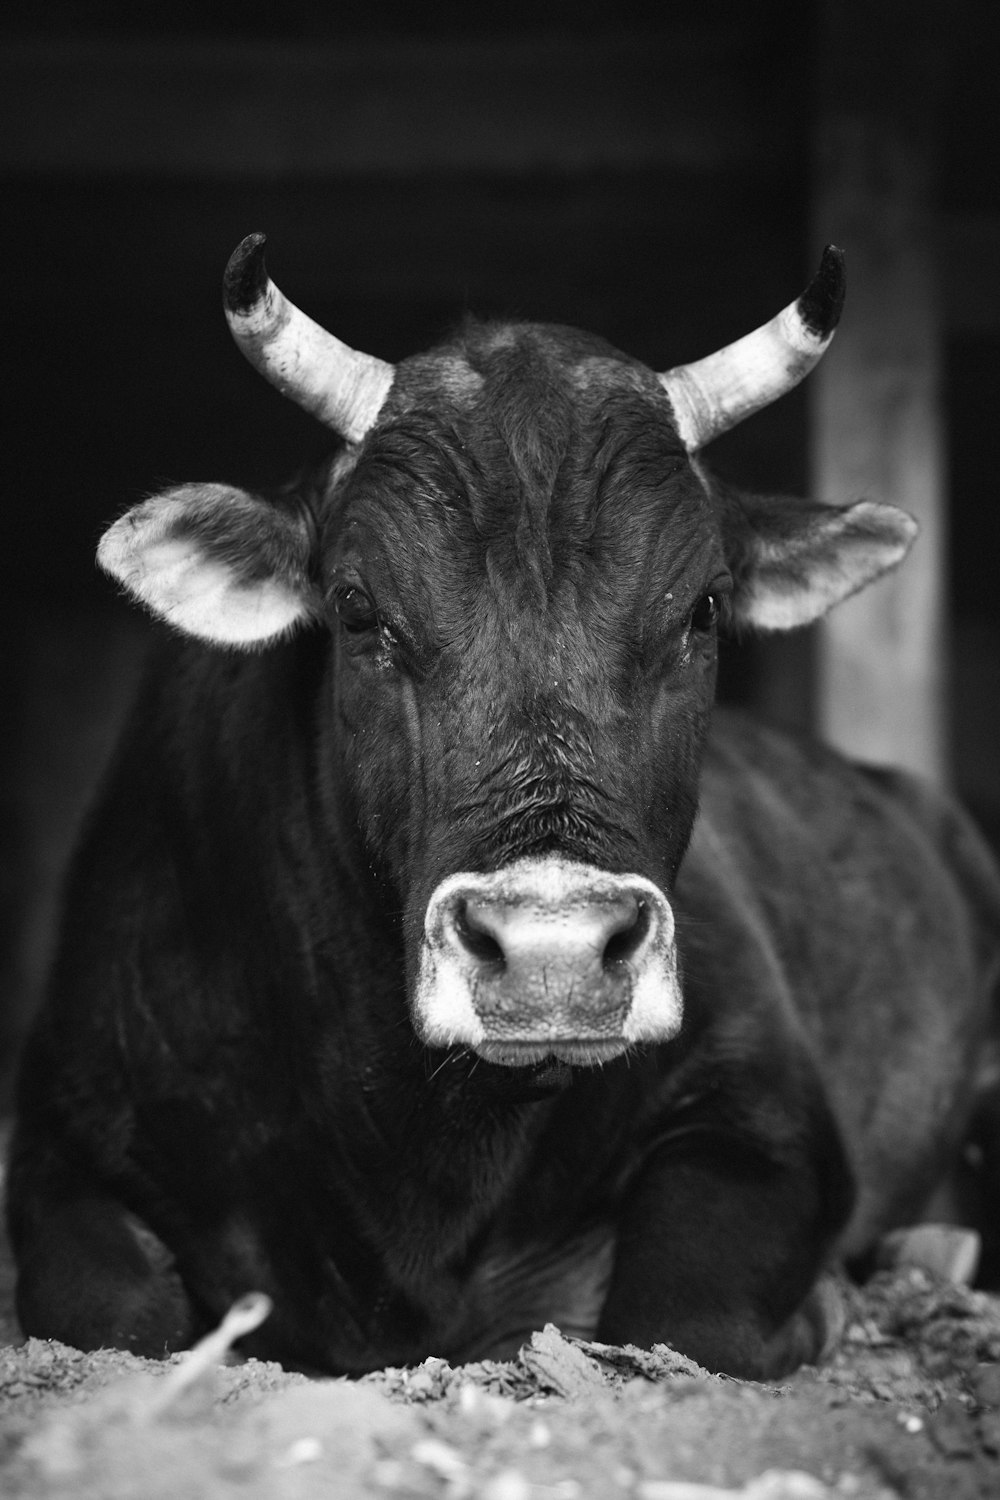 grayscale photo of cow with white eye